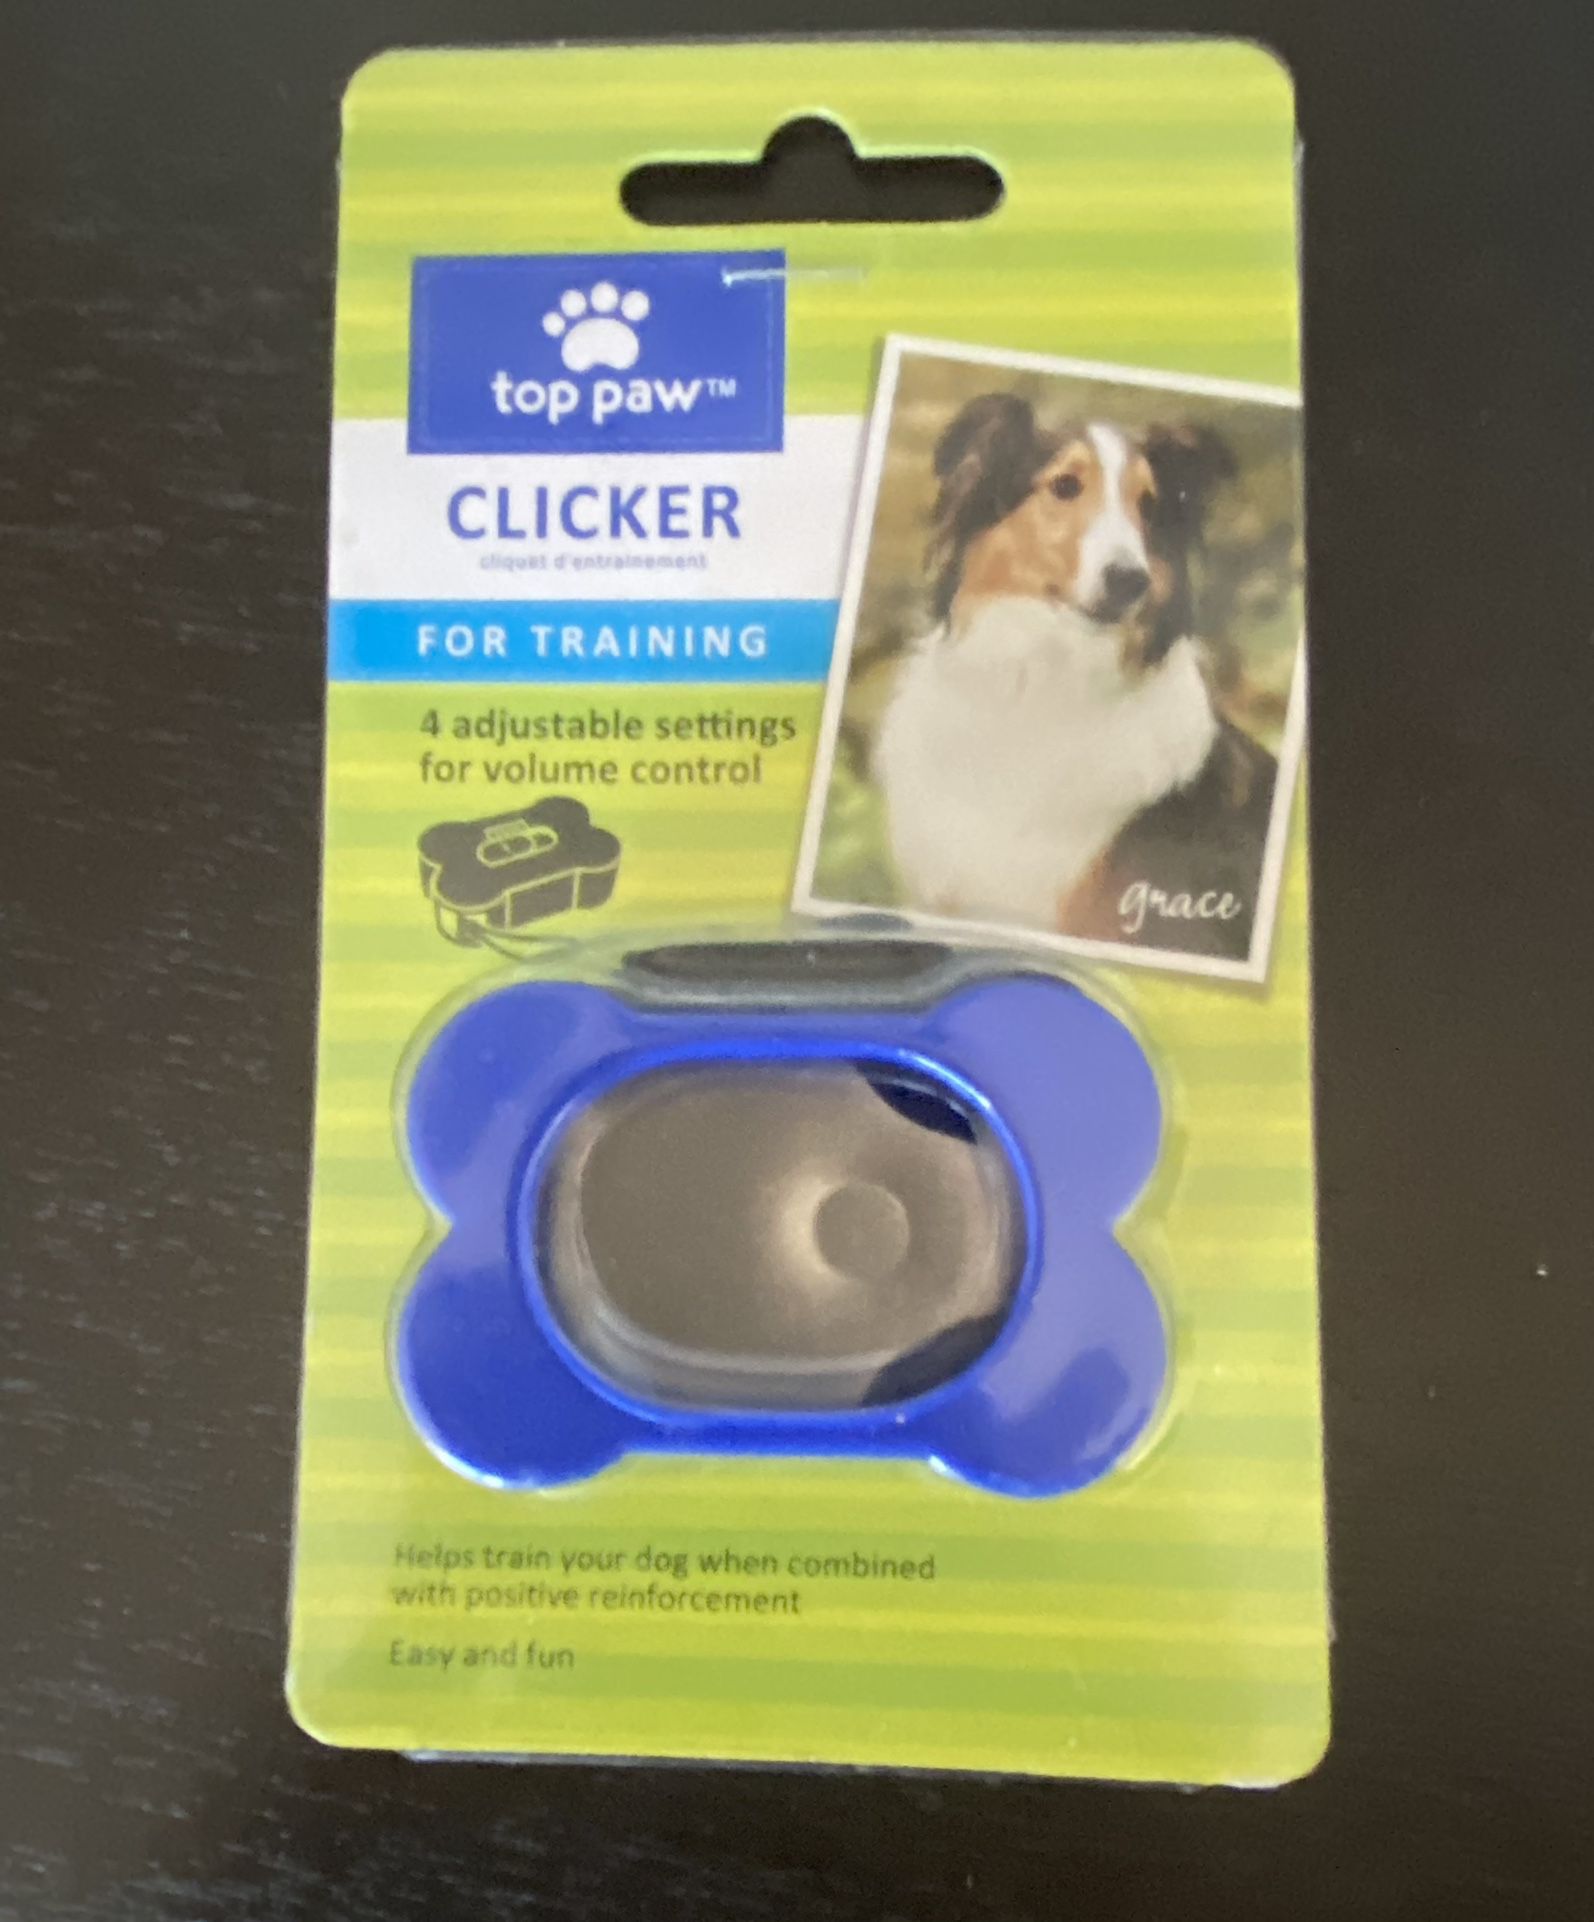 New Top Paw Clicker For Dog Training - 4 Adjustable Settings